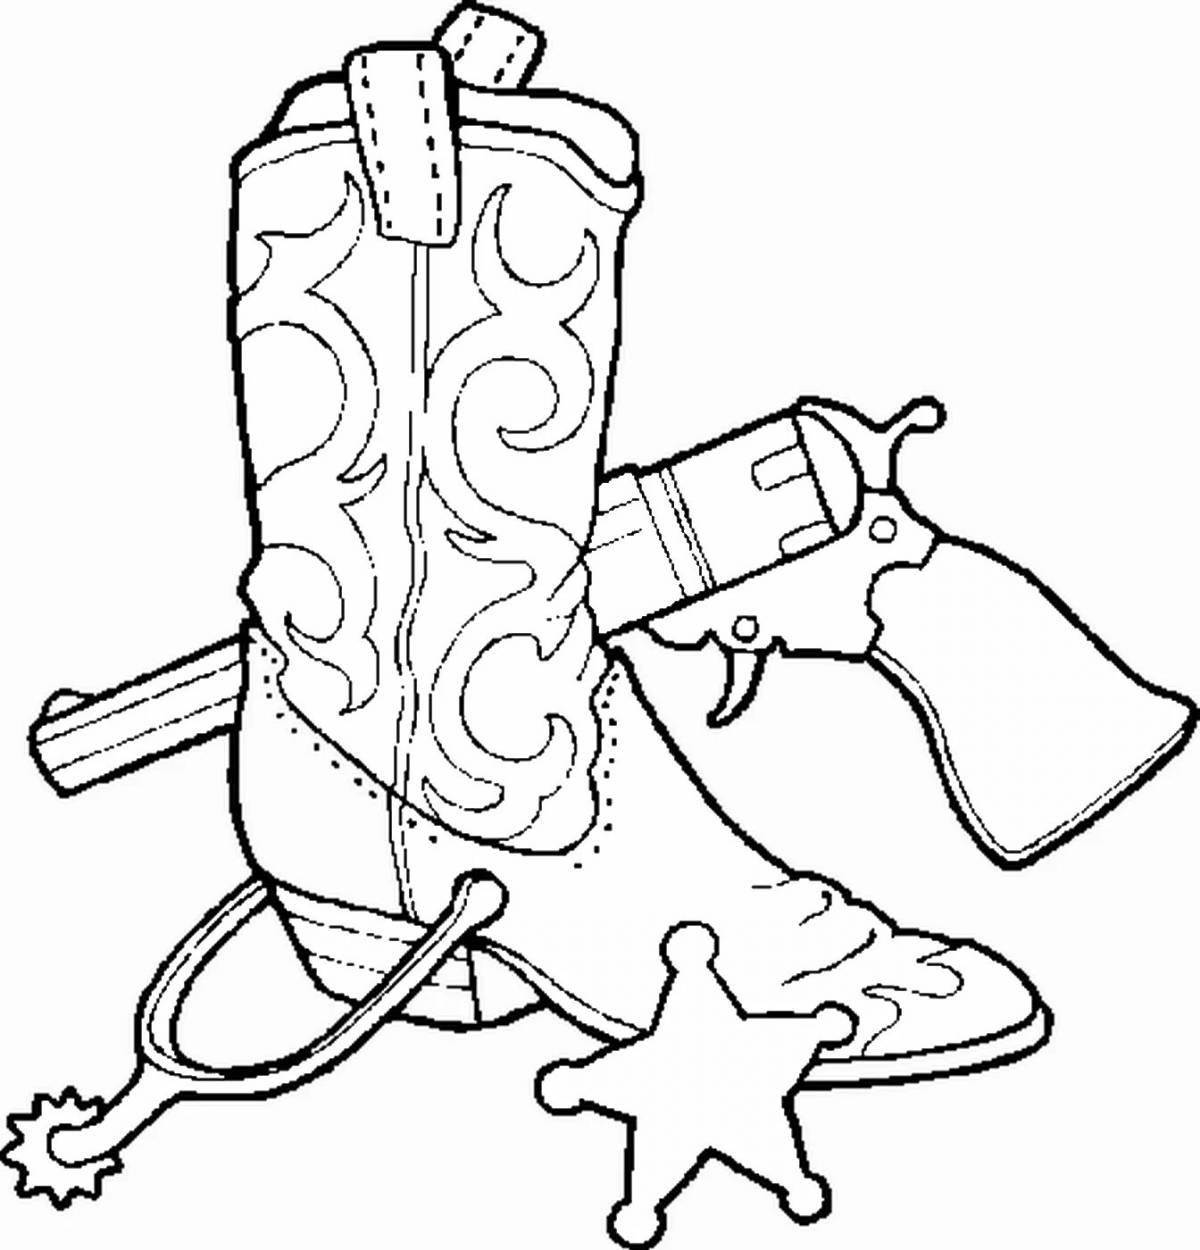 Great shoes coloring page